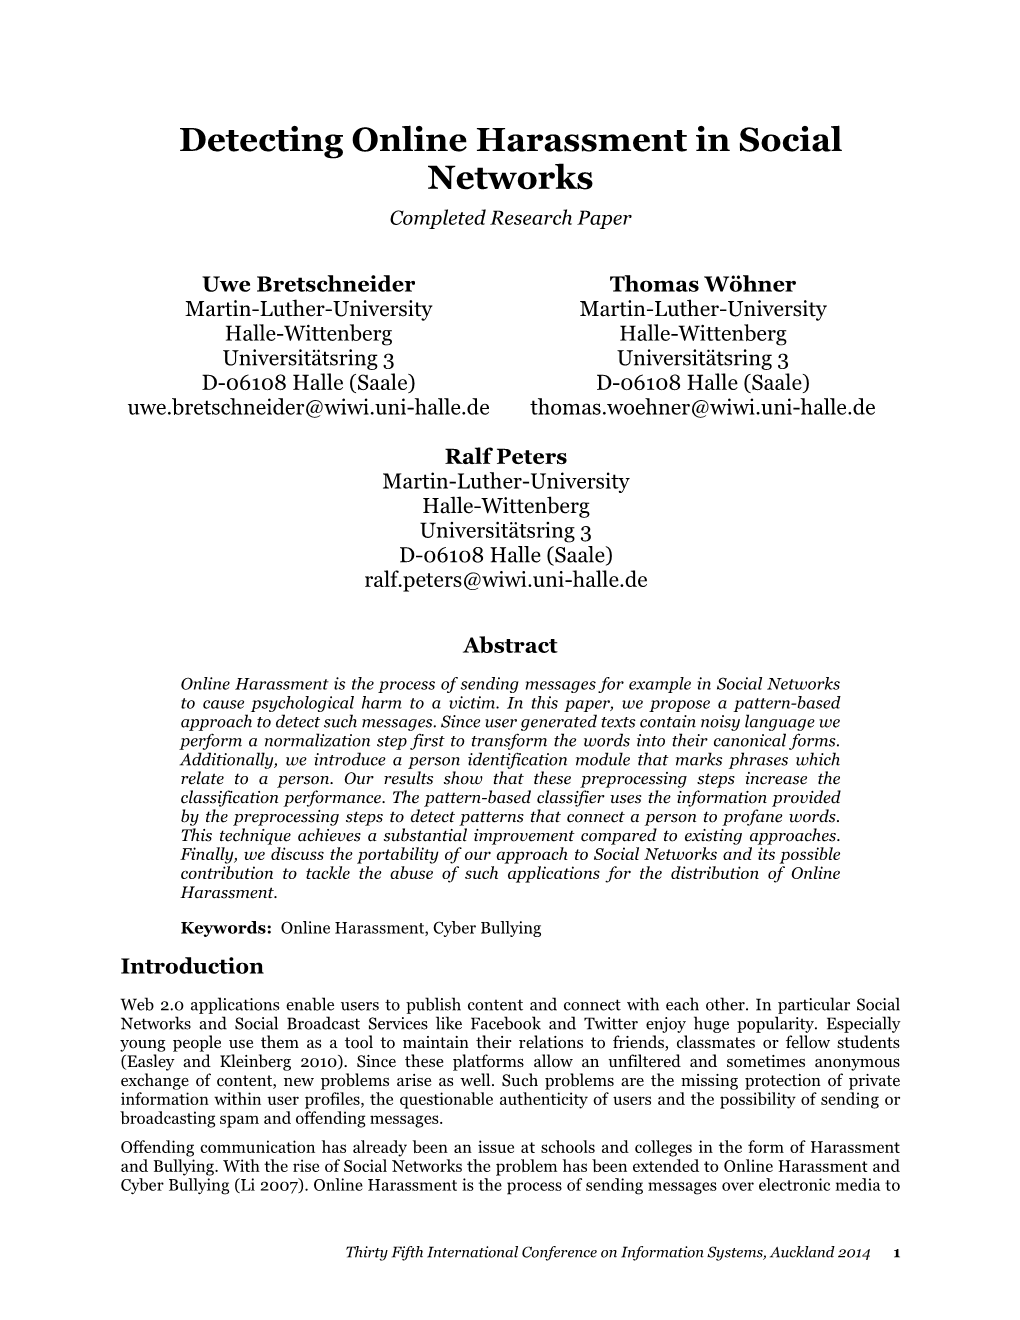 Detecting Online Harassment in Social Networks Completed Research Paper